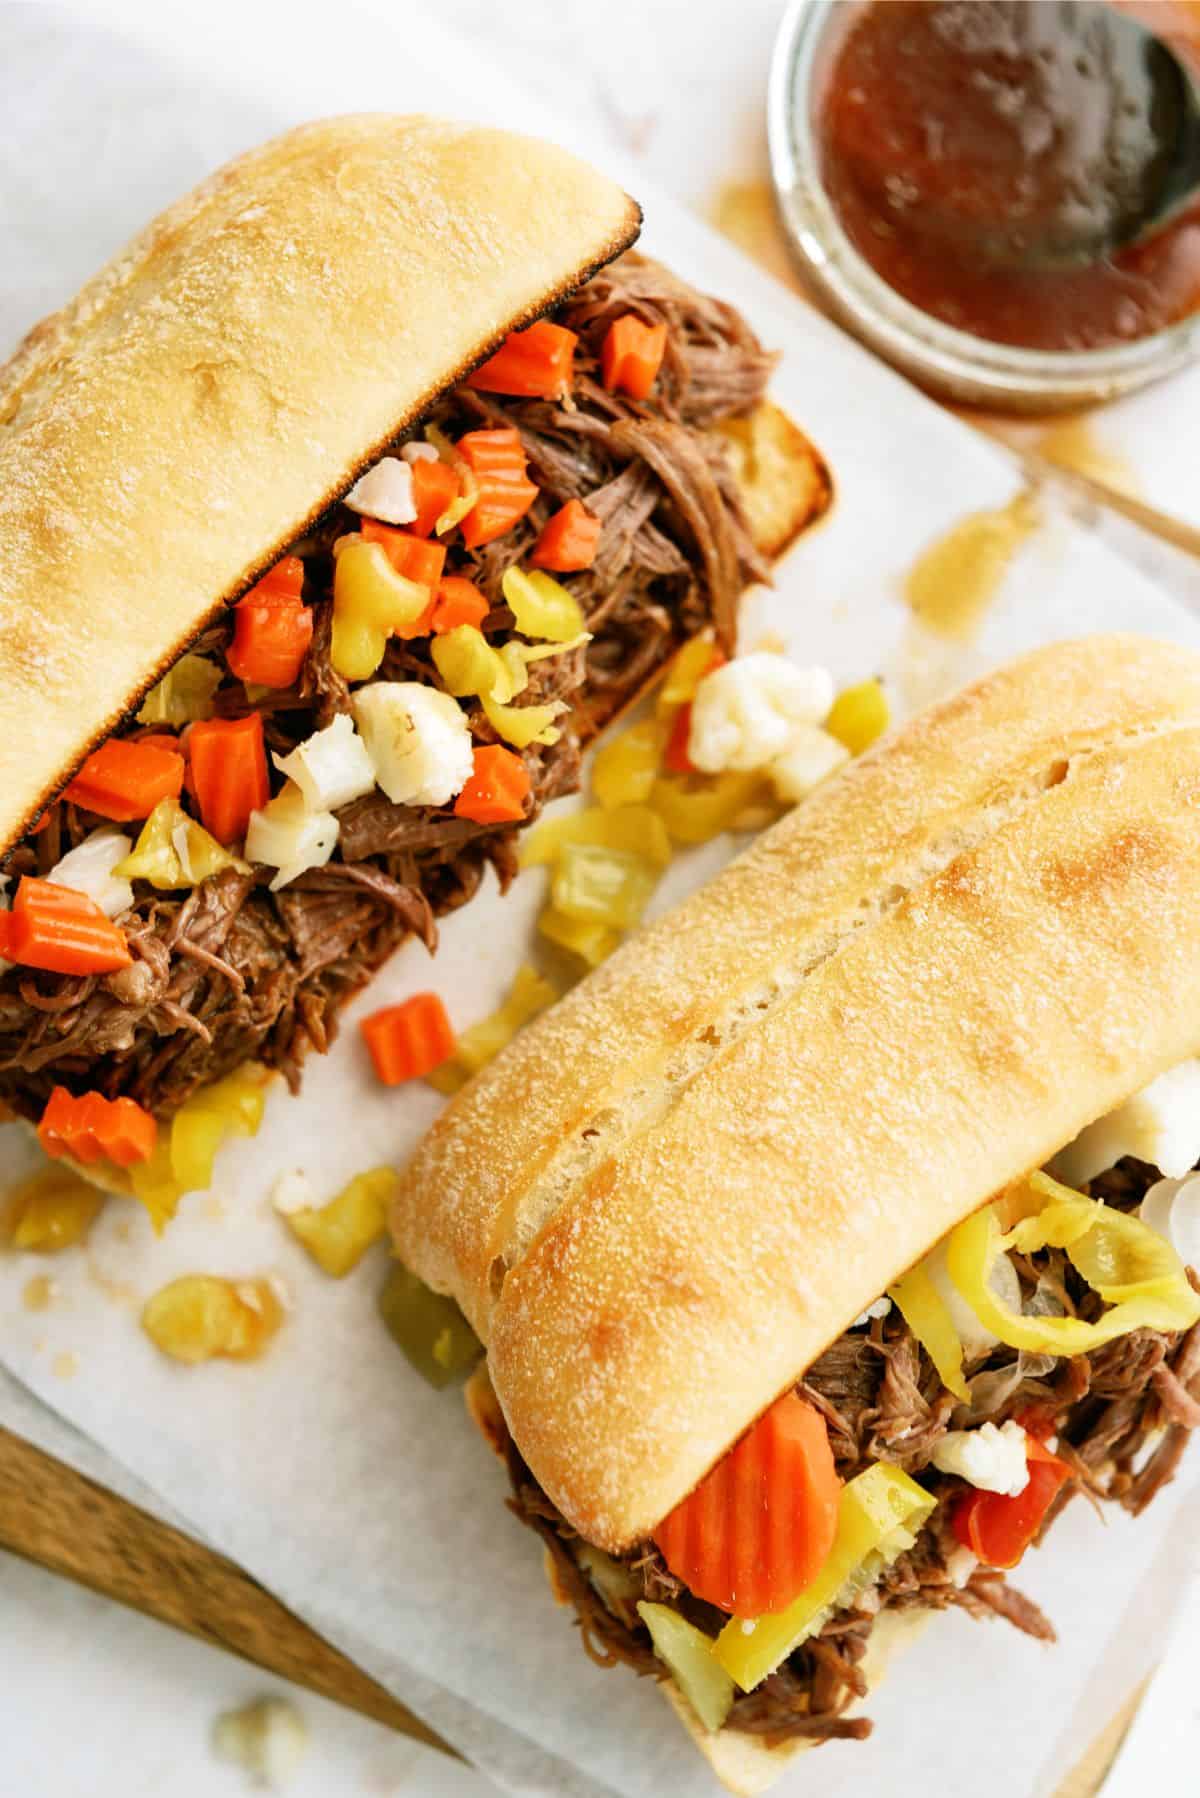 Chicago-style Italian beef springs up near Boston - Hungry Travelers